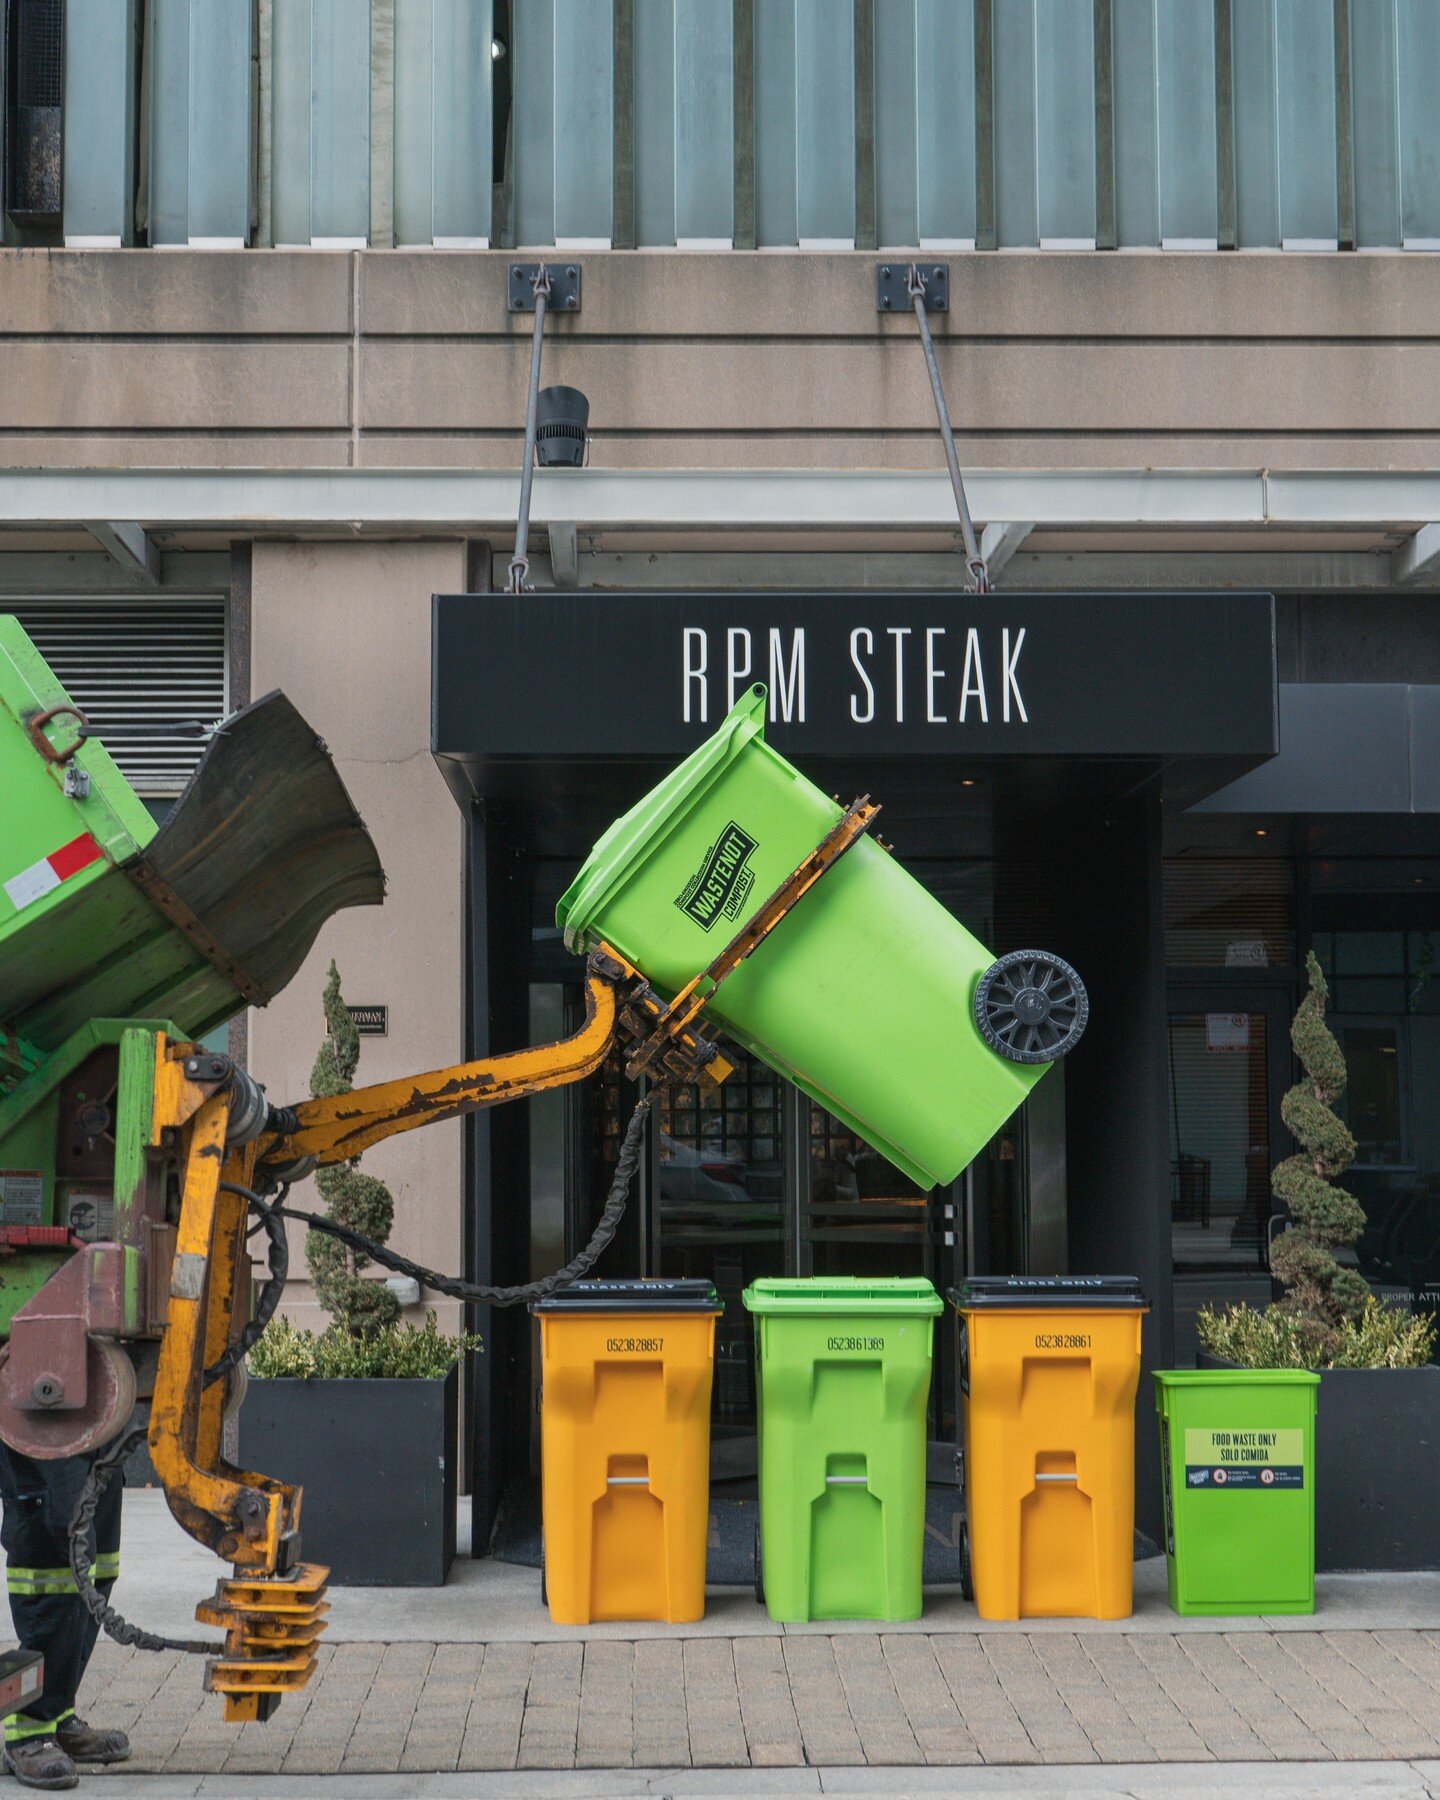 We 💚 our composting restaurant partners

Thank you to @crainschicago for highlighting the impact being made by the restaurants that compost with WasteNot:

&ldquo;The taco joint [@bigstarchicago], owned by @oneoffhospitality, is among a wave of Chic